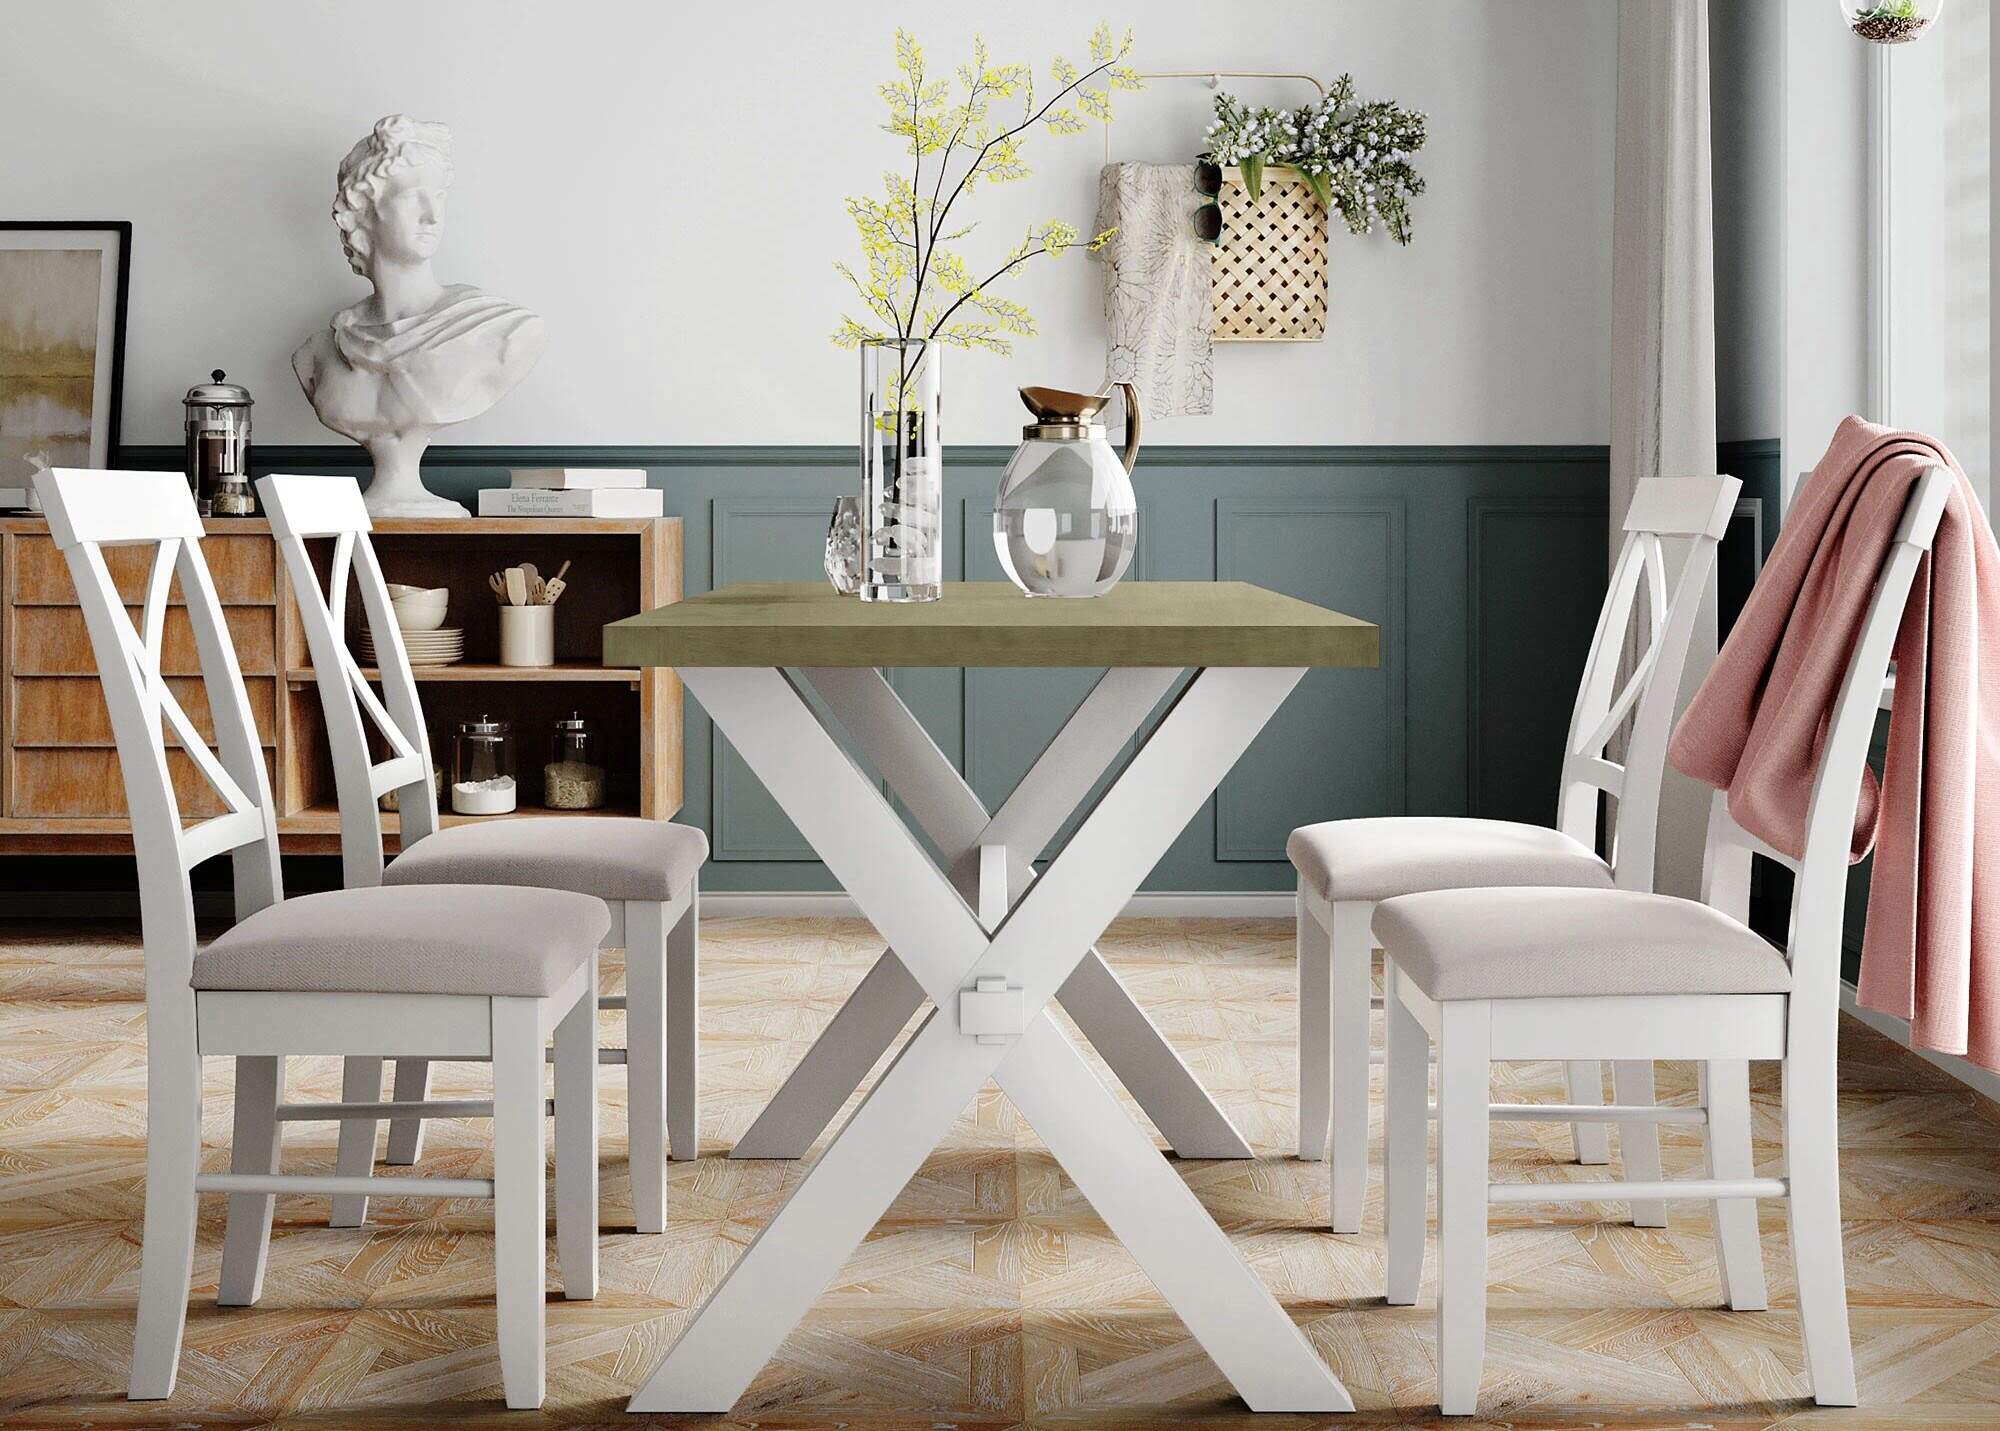 How To Paint A Dining Table In Farmhouse Style